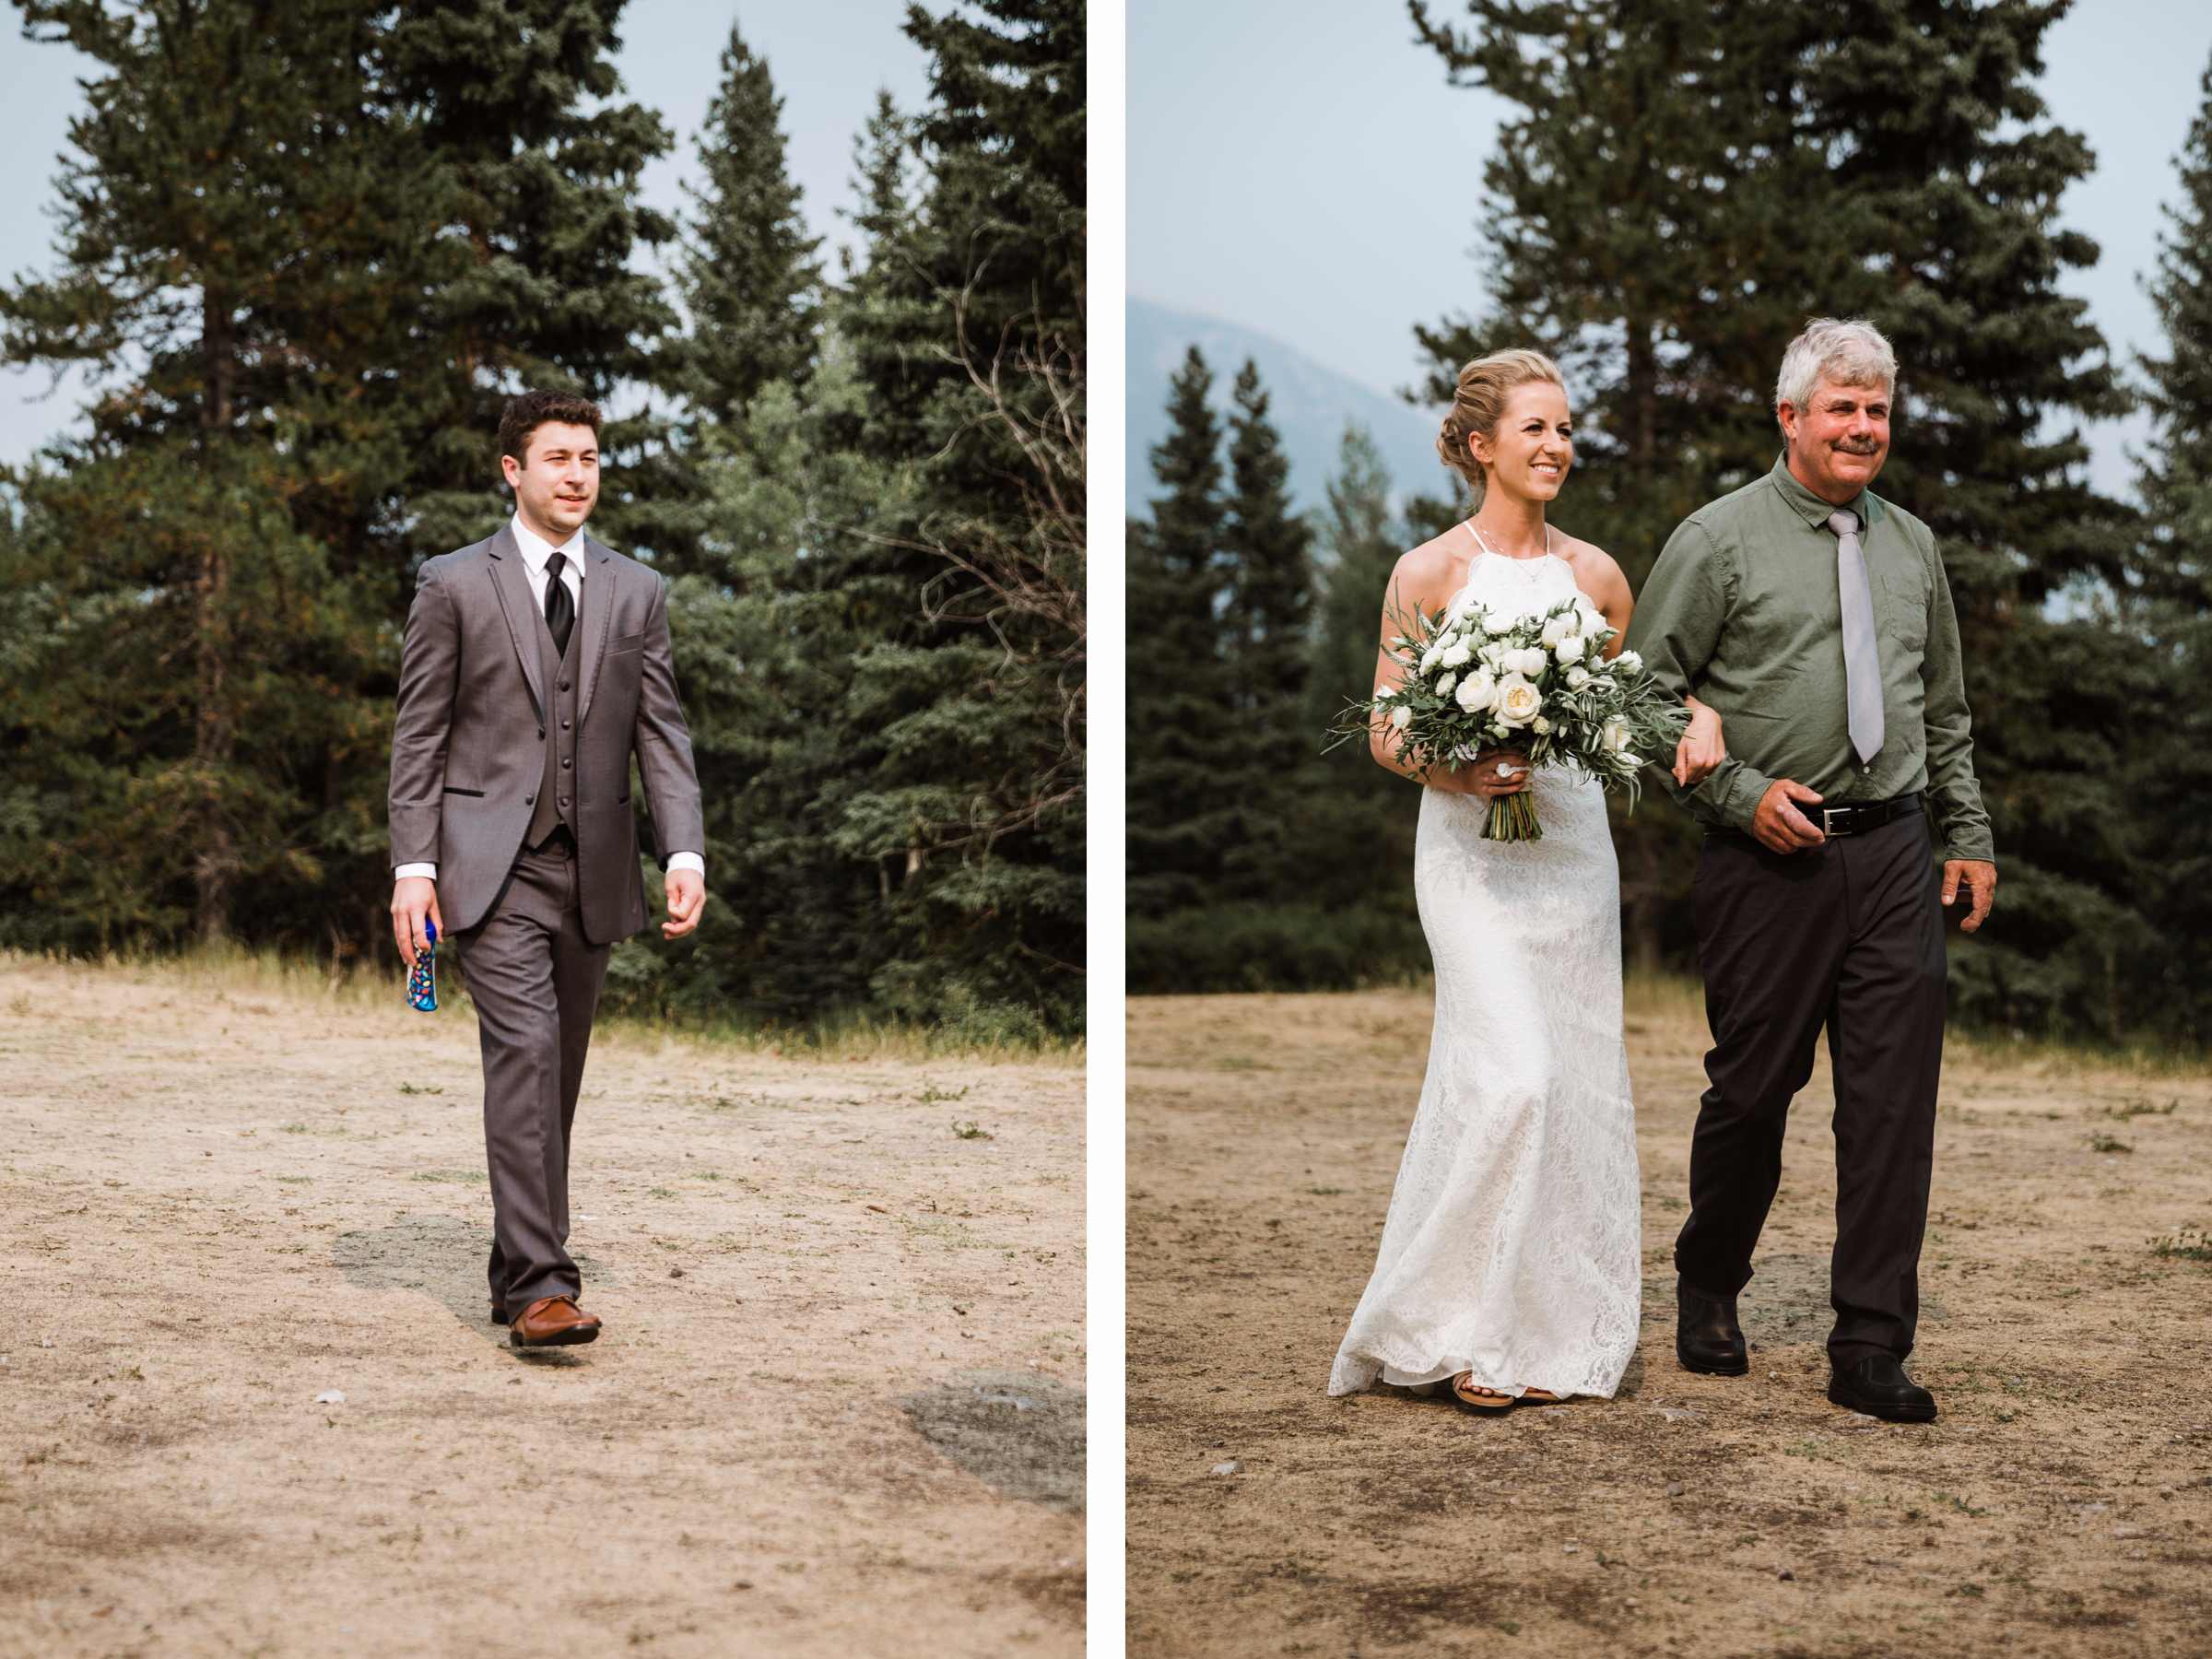 Calgary wedding photographer at Canmore and Banff destination elopement wedding in rocky mountains, Alberta, Canada - Photo 5